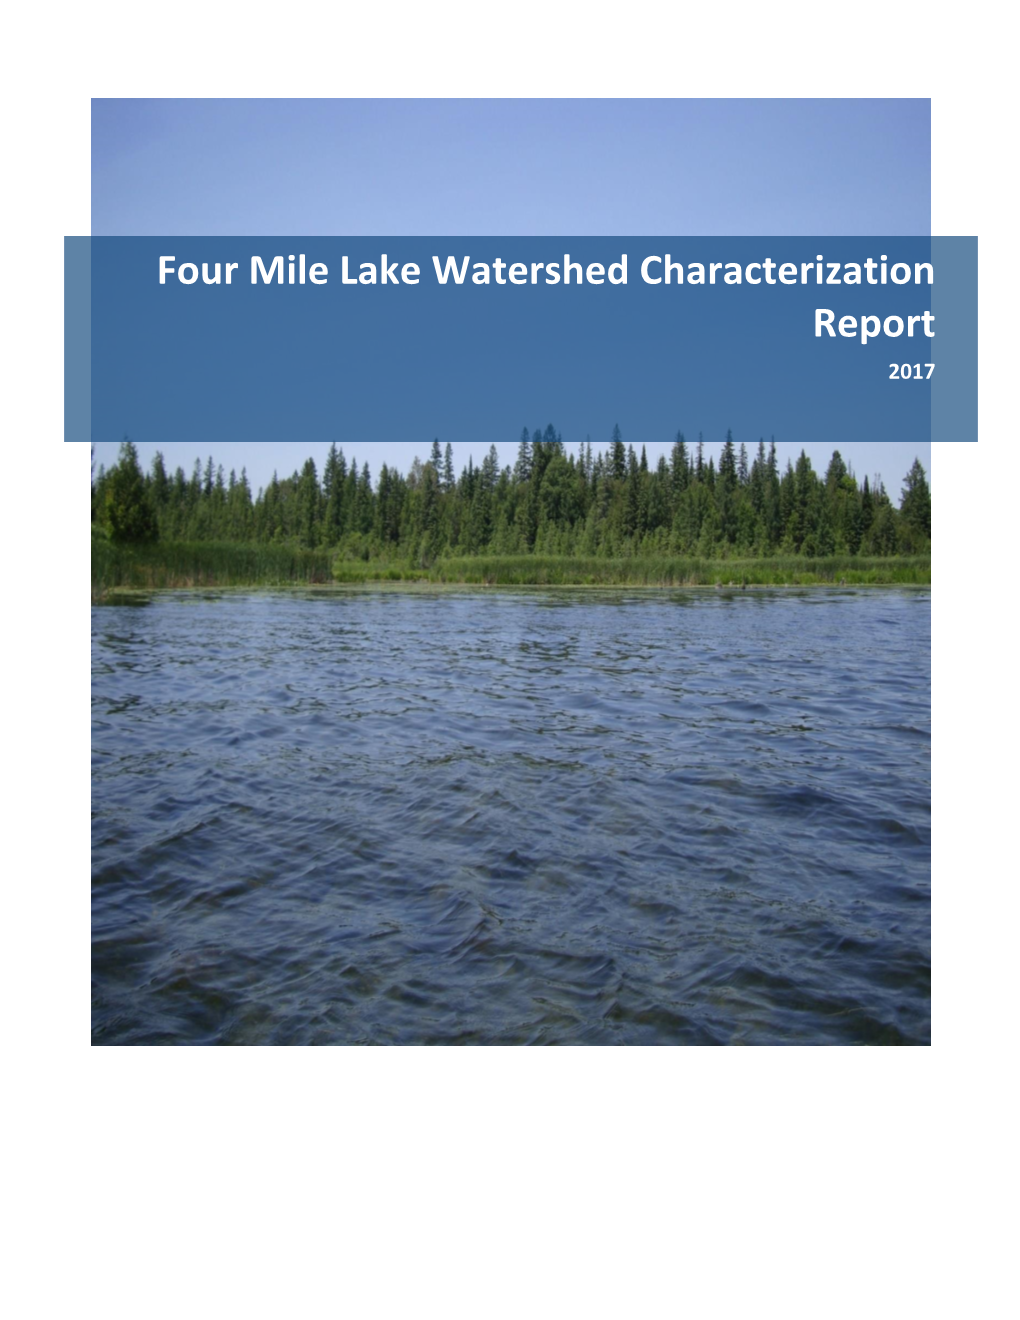 Four Mile Lake Watershed Characterization Report 2017